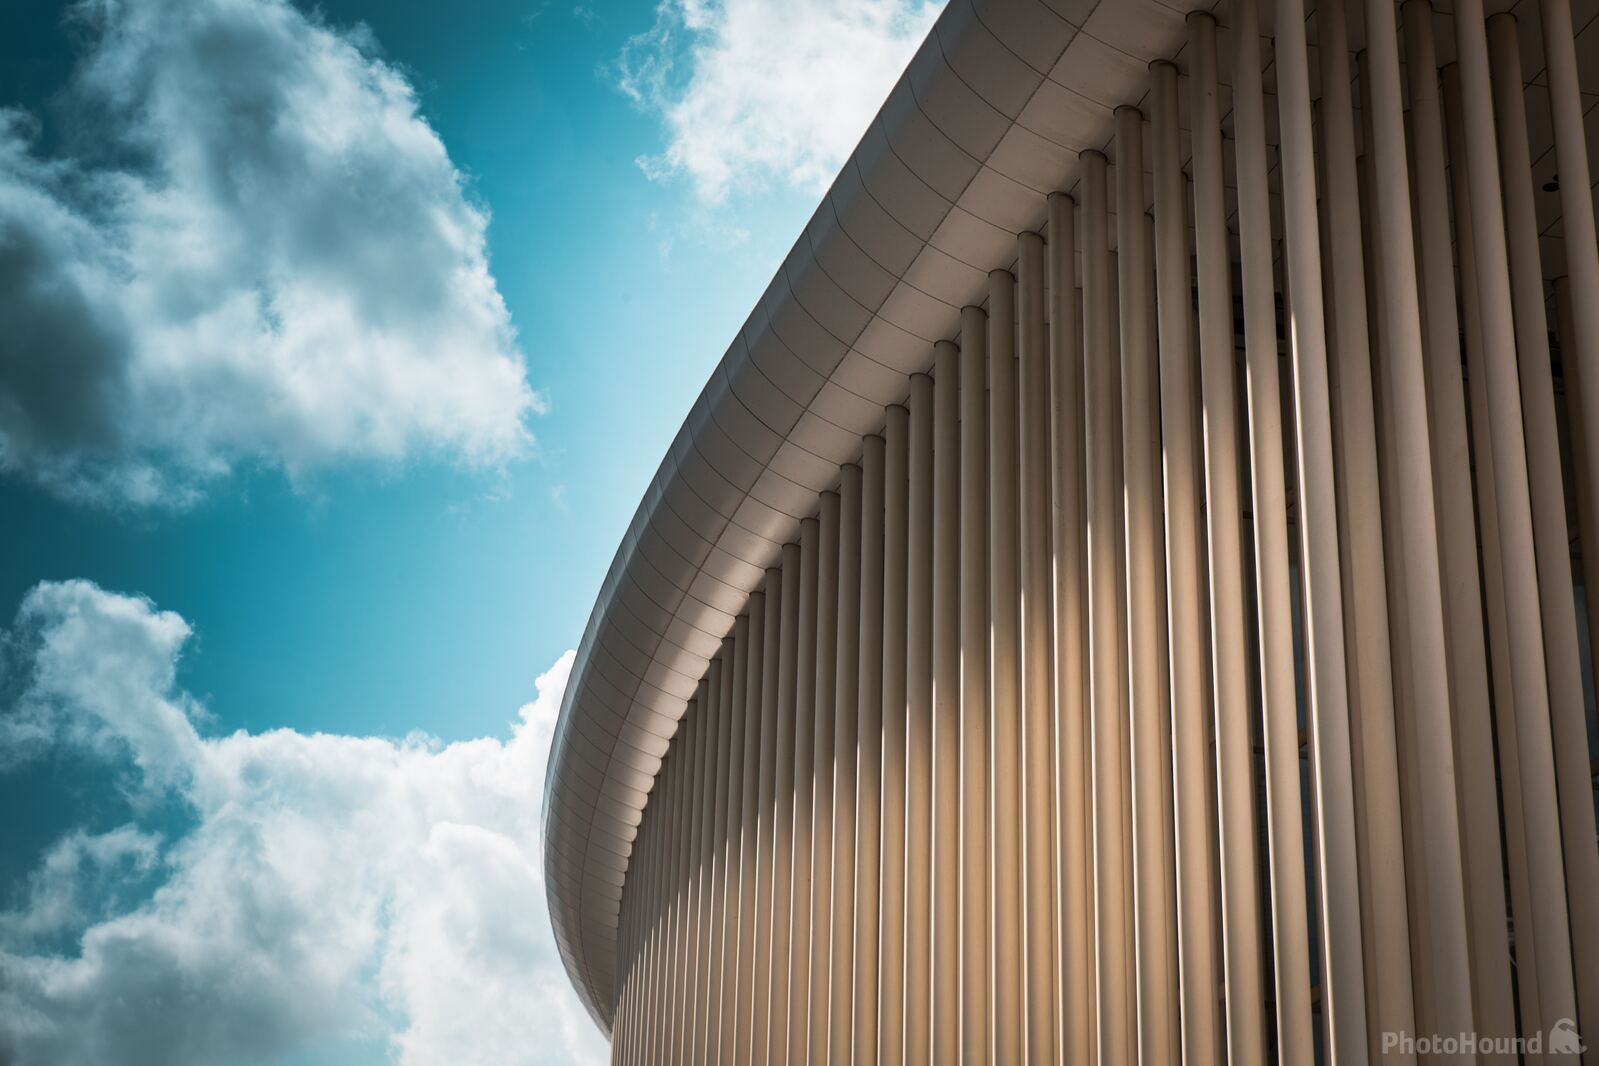 Image of Luxembourg Philharmonie - Exterior by Team PhotoHound